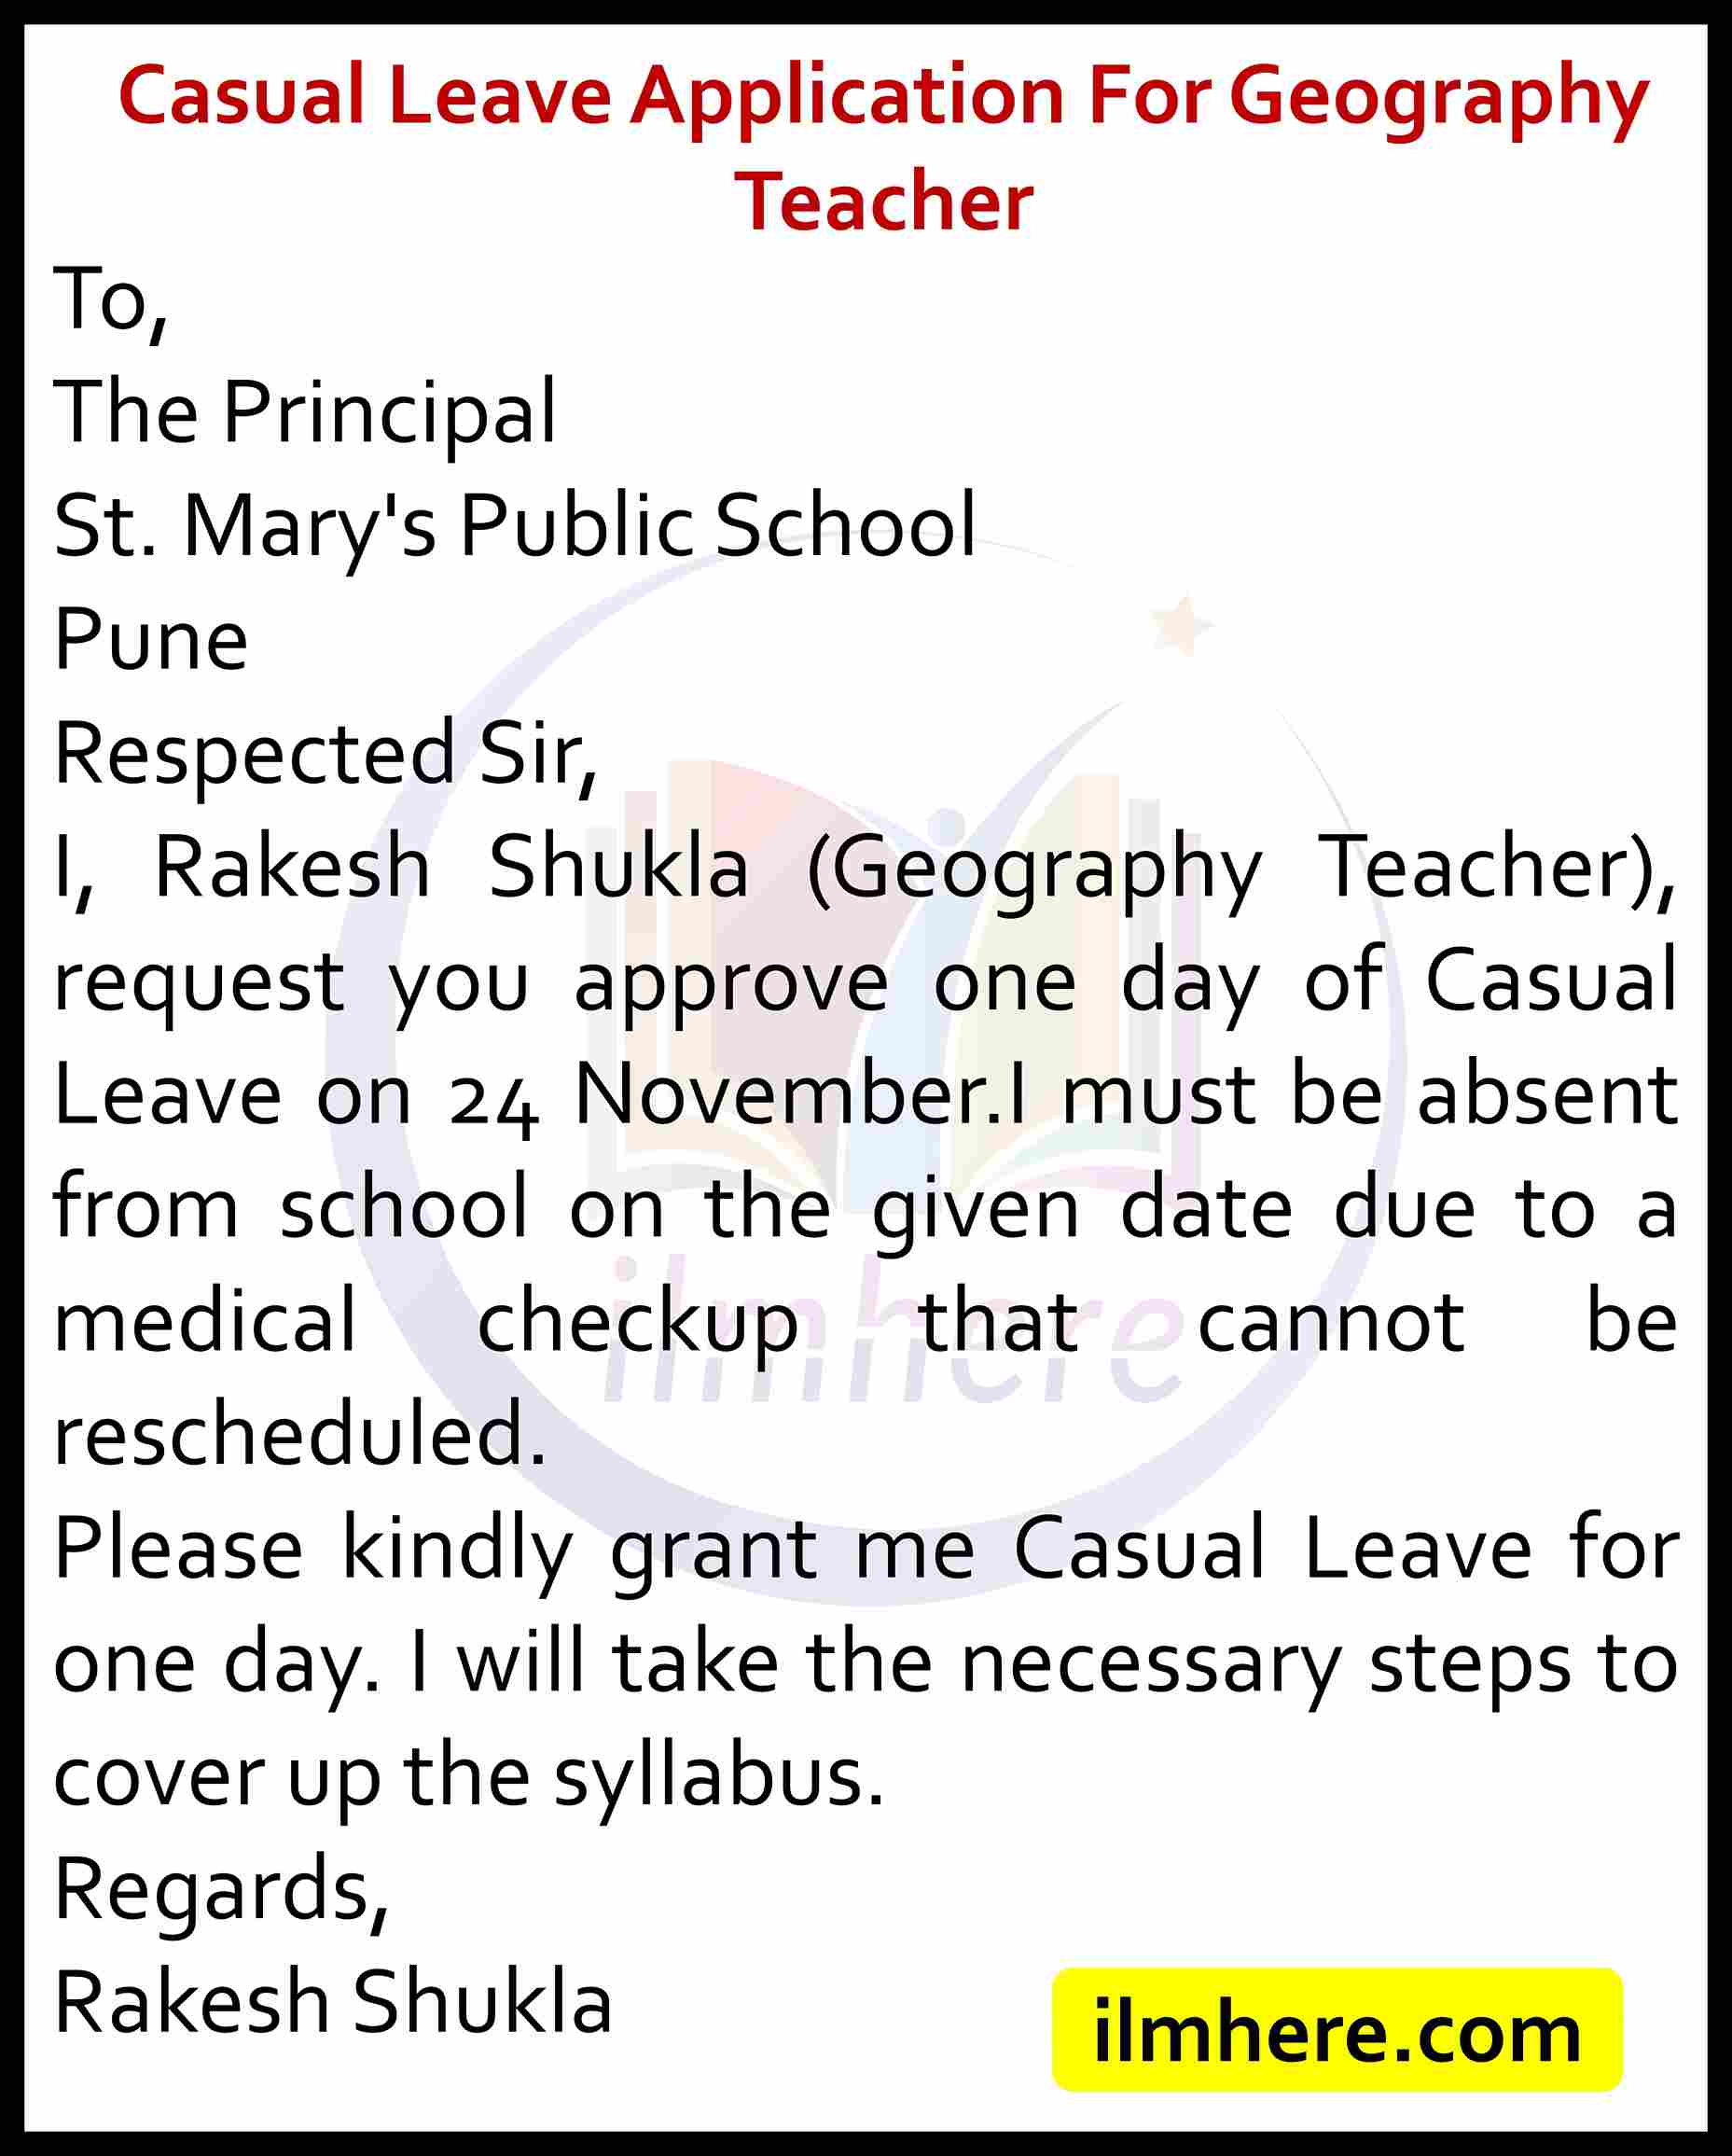 Casual Leave Application For Geography Teacher